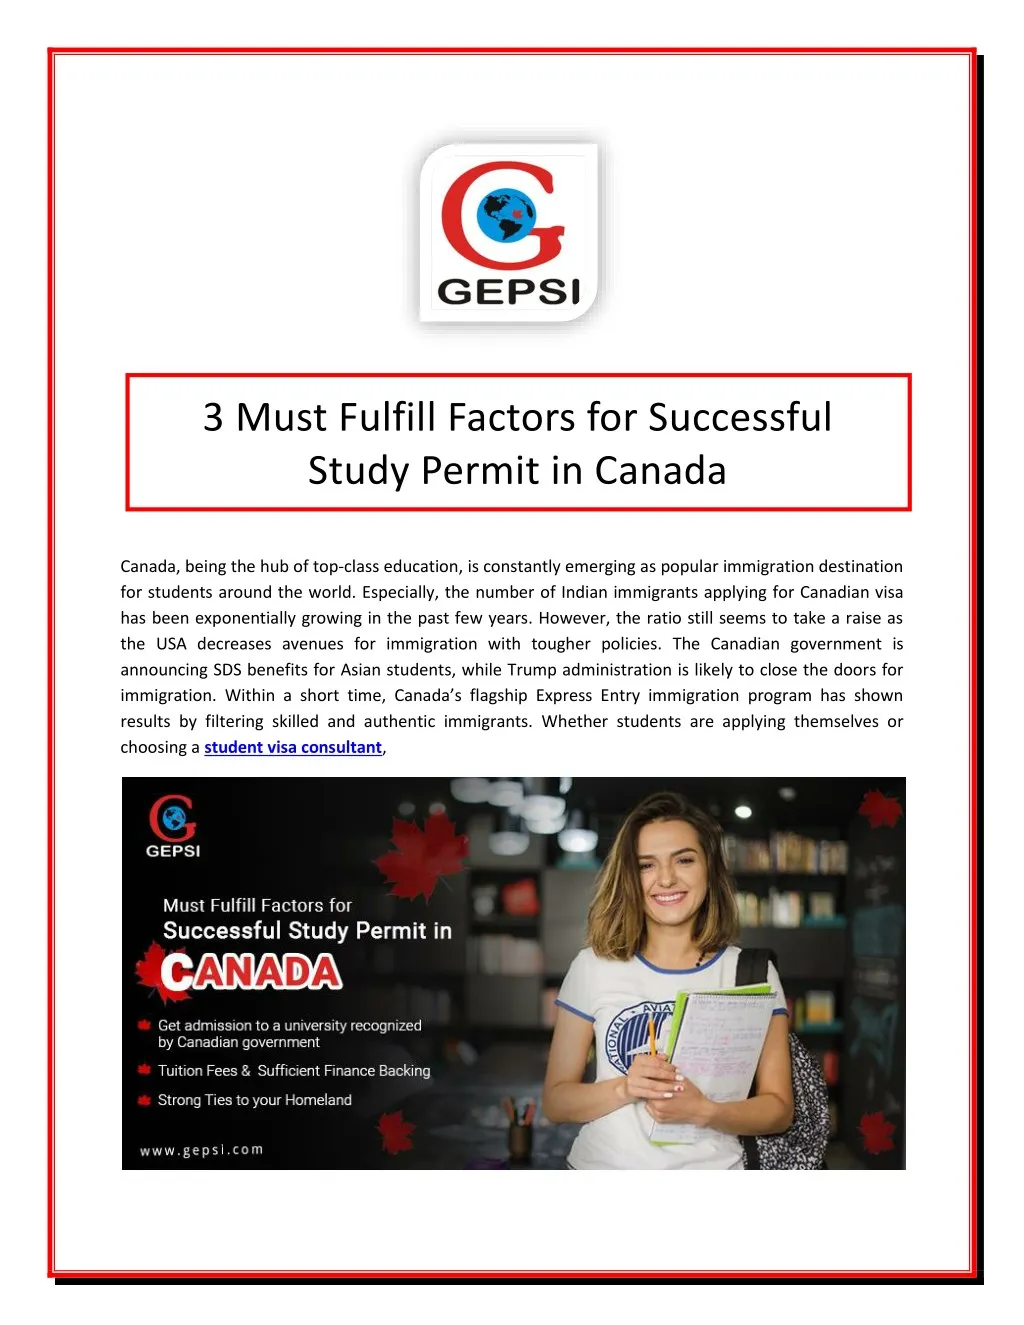 3 must fulfill factors for successful study